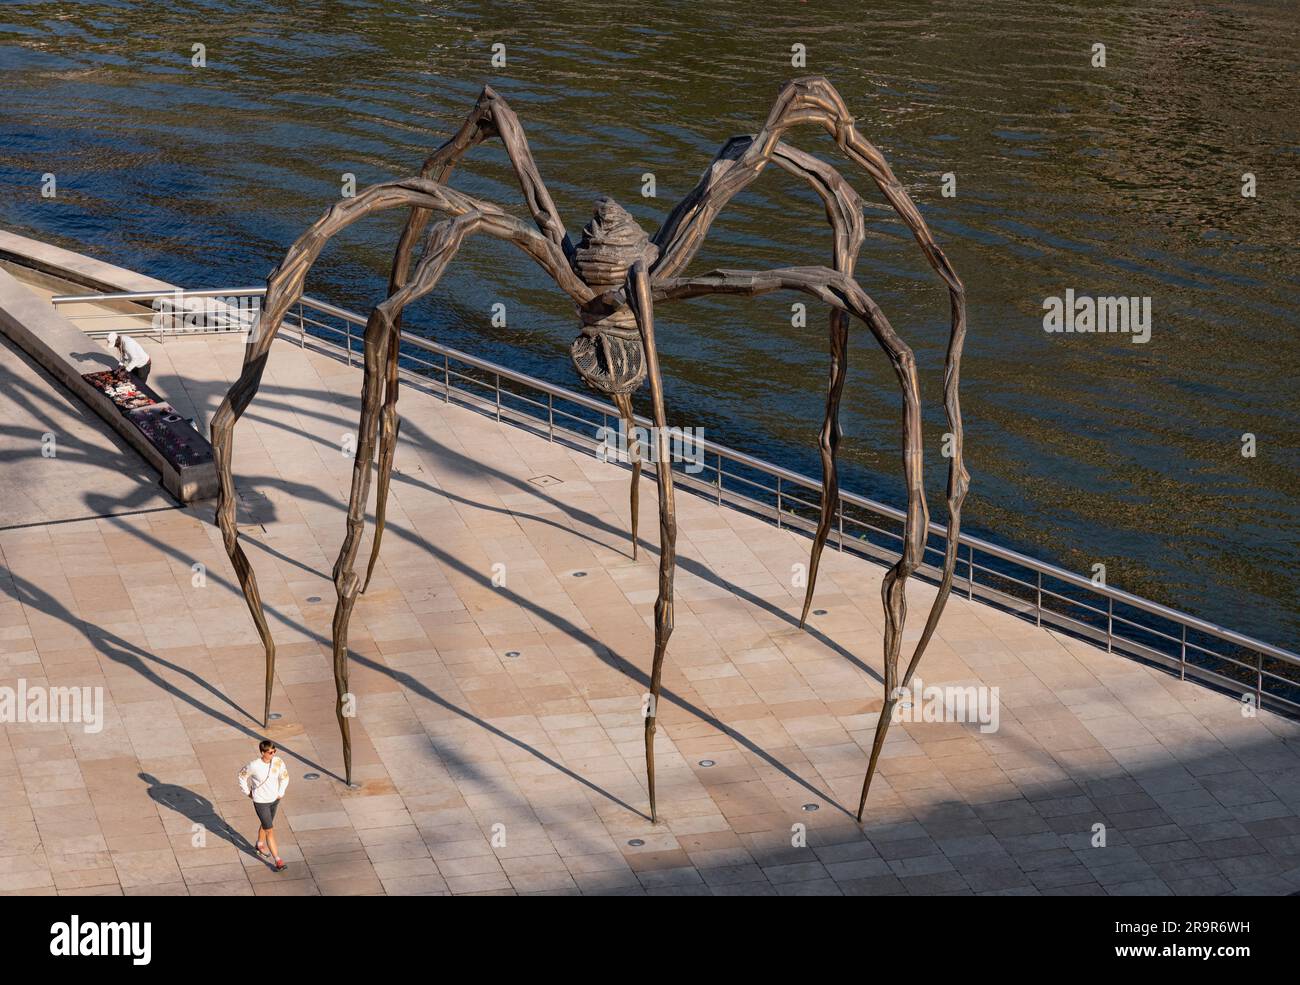 Spain, Basque Country, Bilbao, Guggenheim Museum area, Maman is a bronze, stainless steel, and marble sculpture of a spider by the artist Louise Bourg Stock Photo